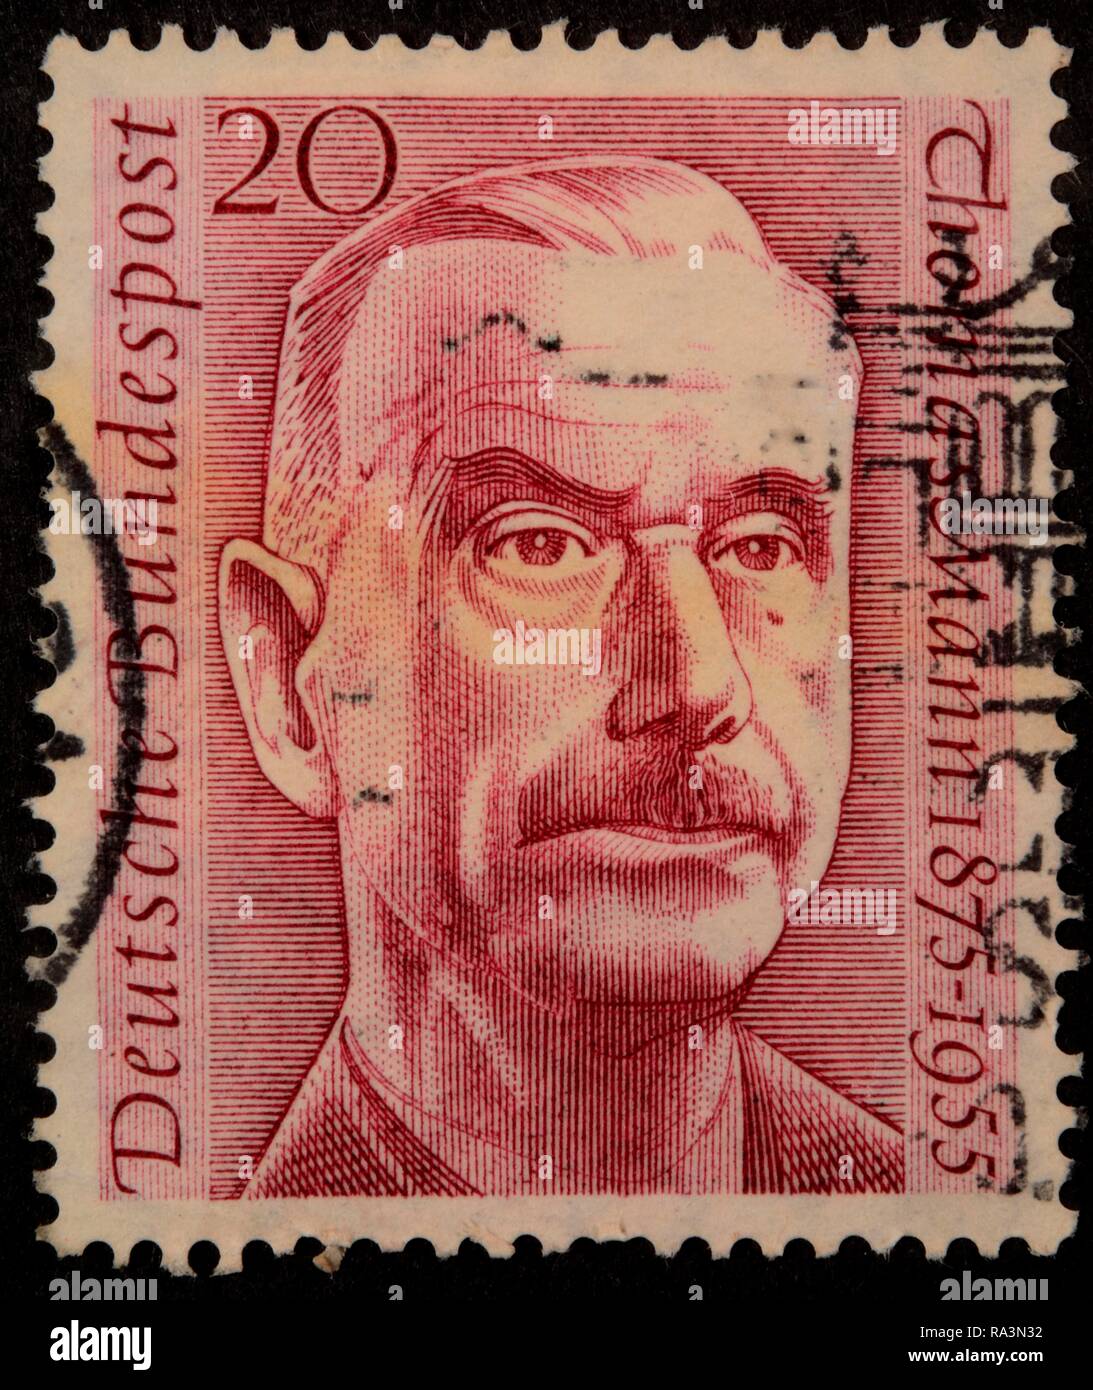 Thomas Mann, a German writer, 1929 Nobel Prize in Literature laureate, portrait on a German stamp, Germany Stock Photo